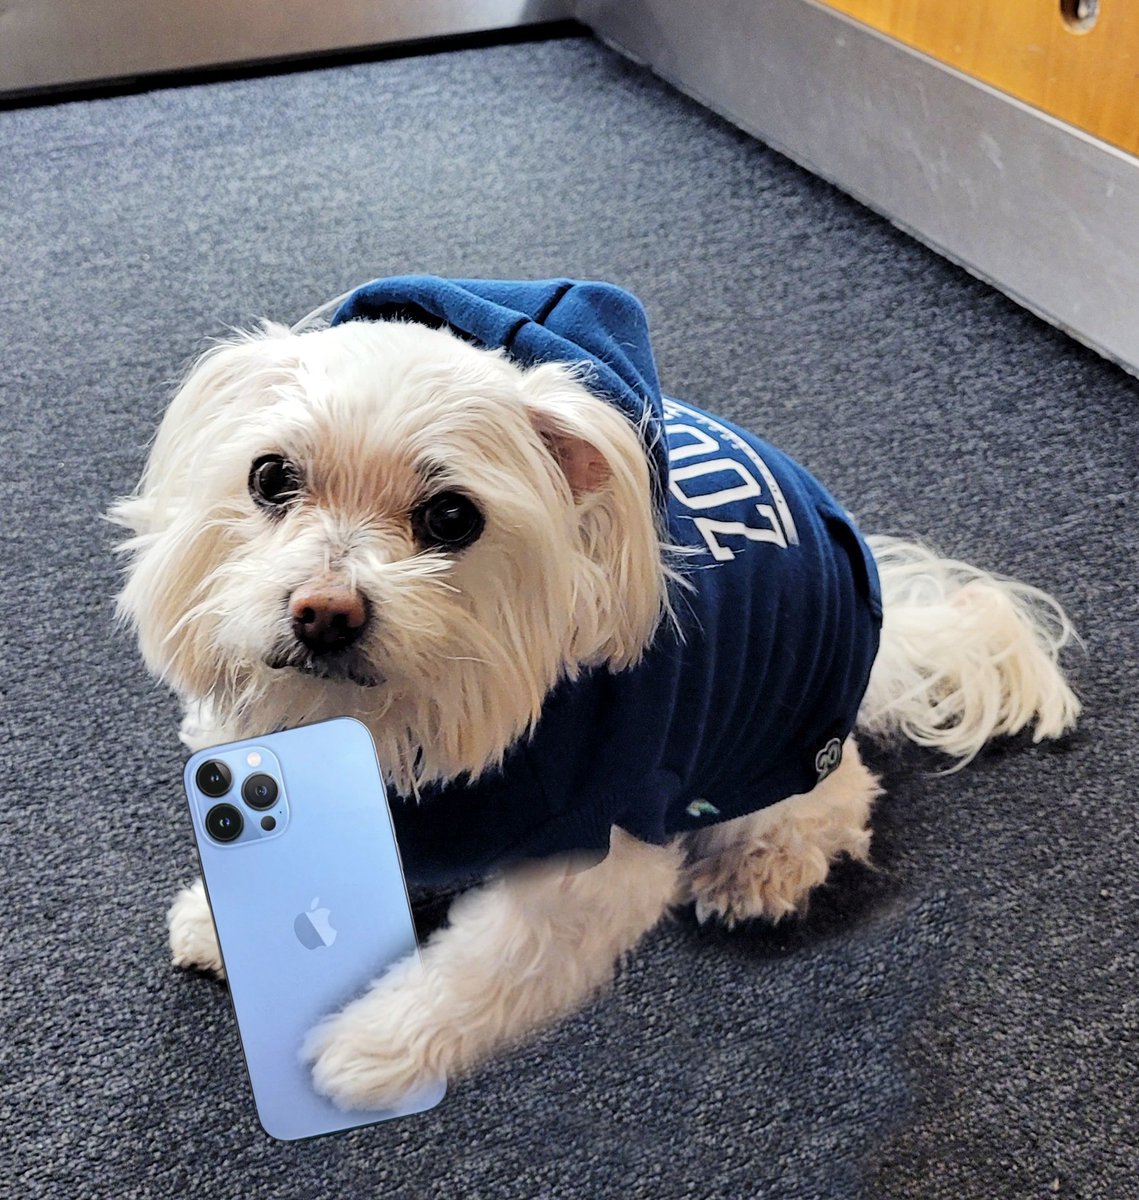 Caught Tao trying to take a selfie 😂 #MeAndMyTao #Maltese #CuteDogs #DogsofTwitter #DogsofMelbourne